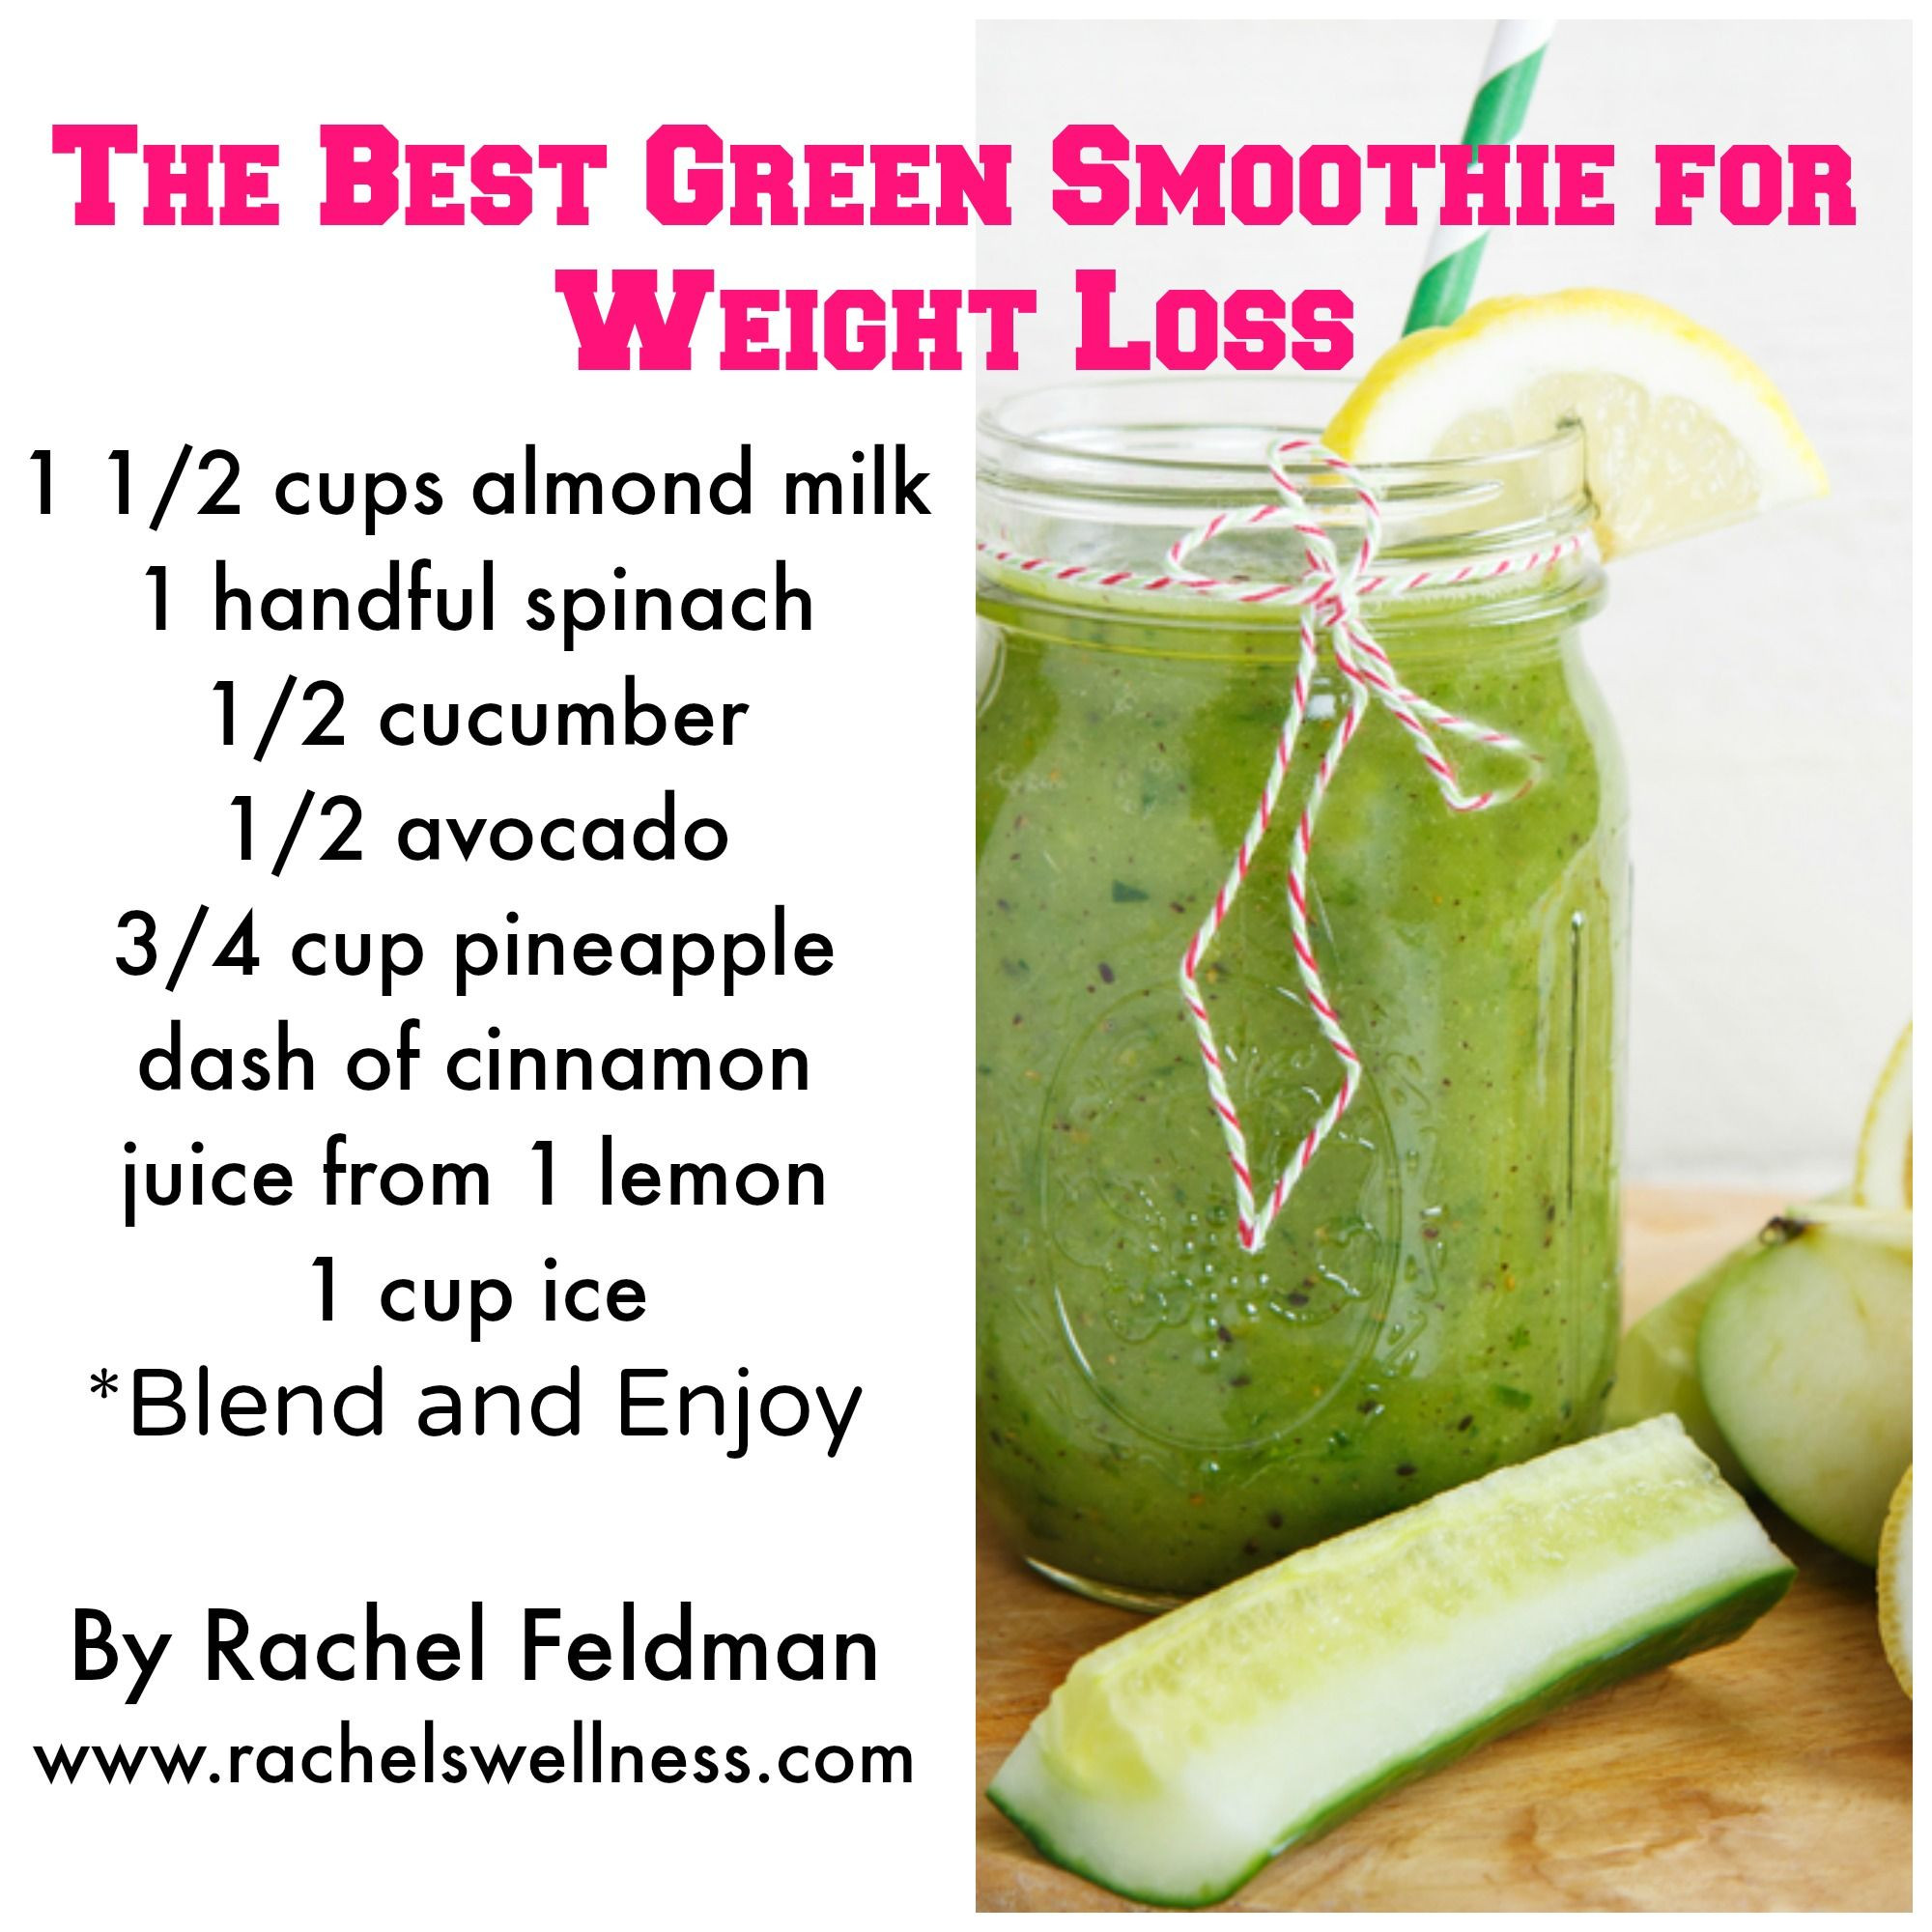 Best Green Smoothie Recipes For Weight Loss
 7 Healthy Green Smoothie Recipes For Weight Loss